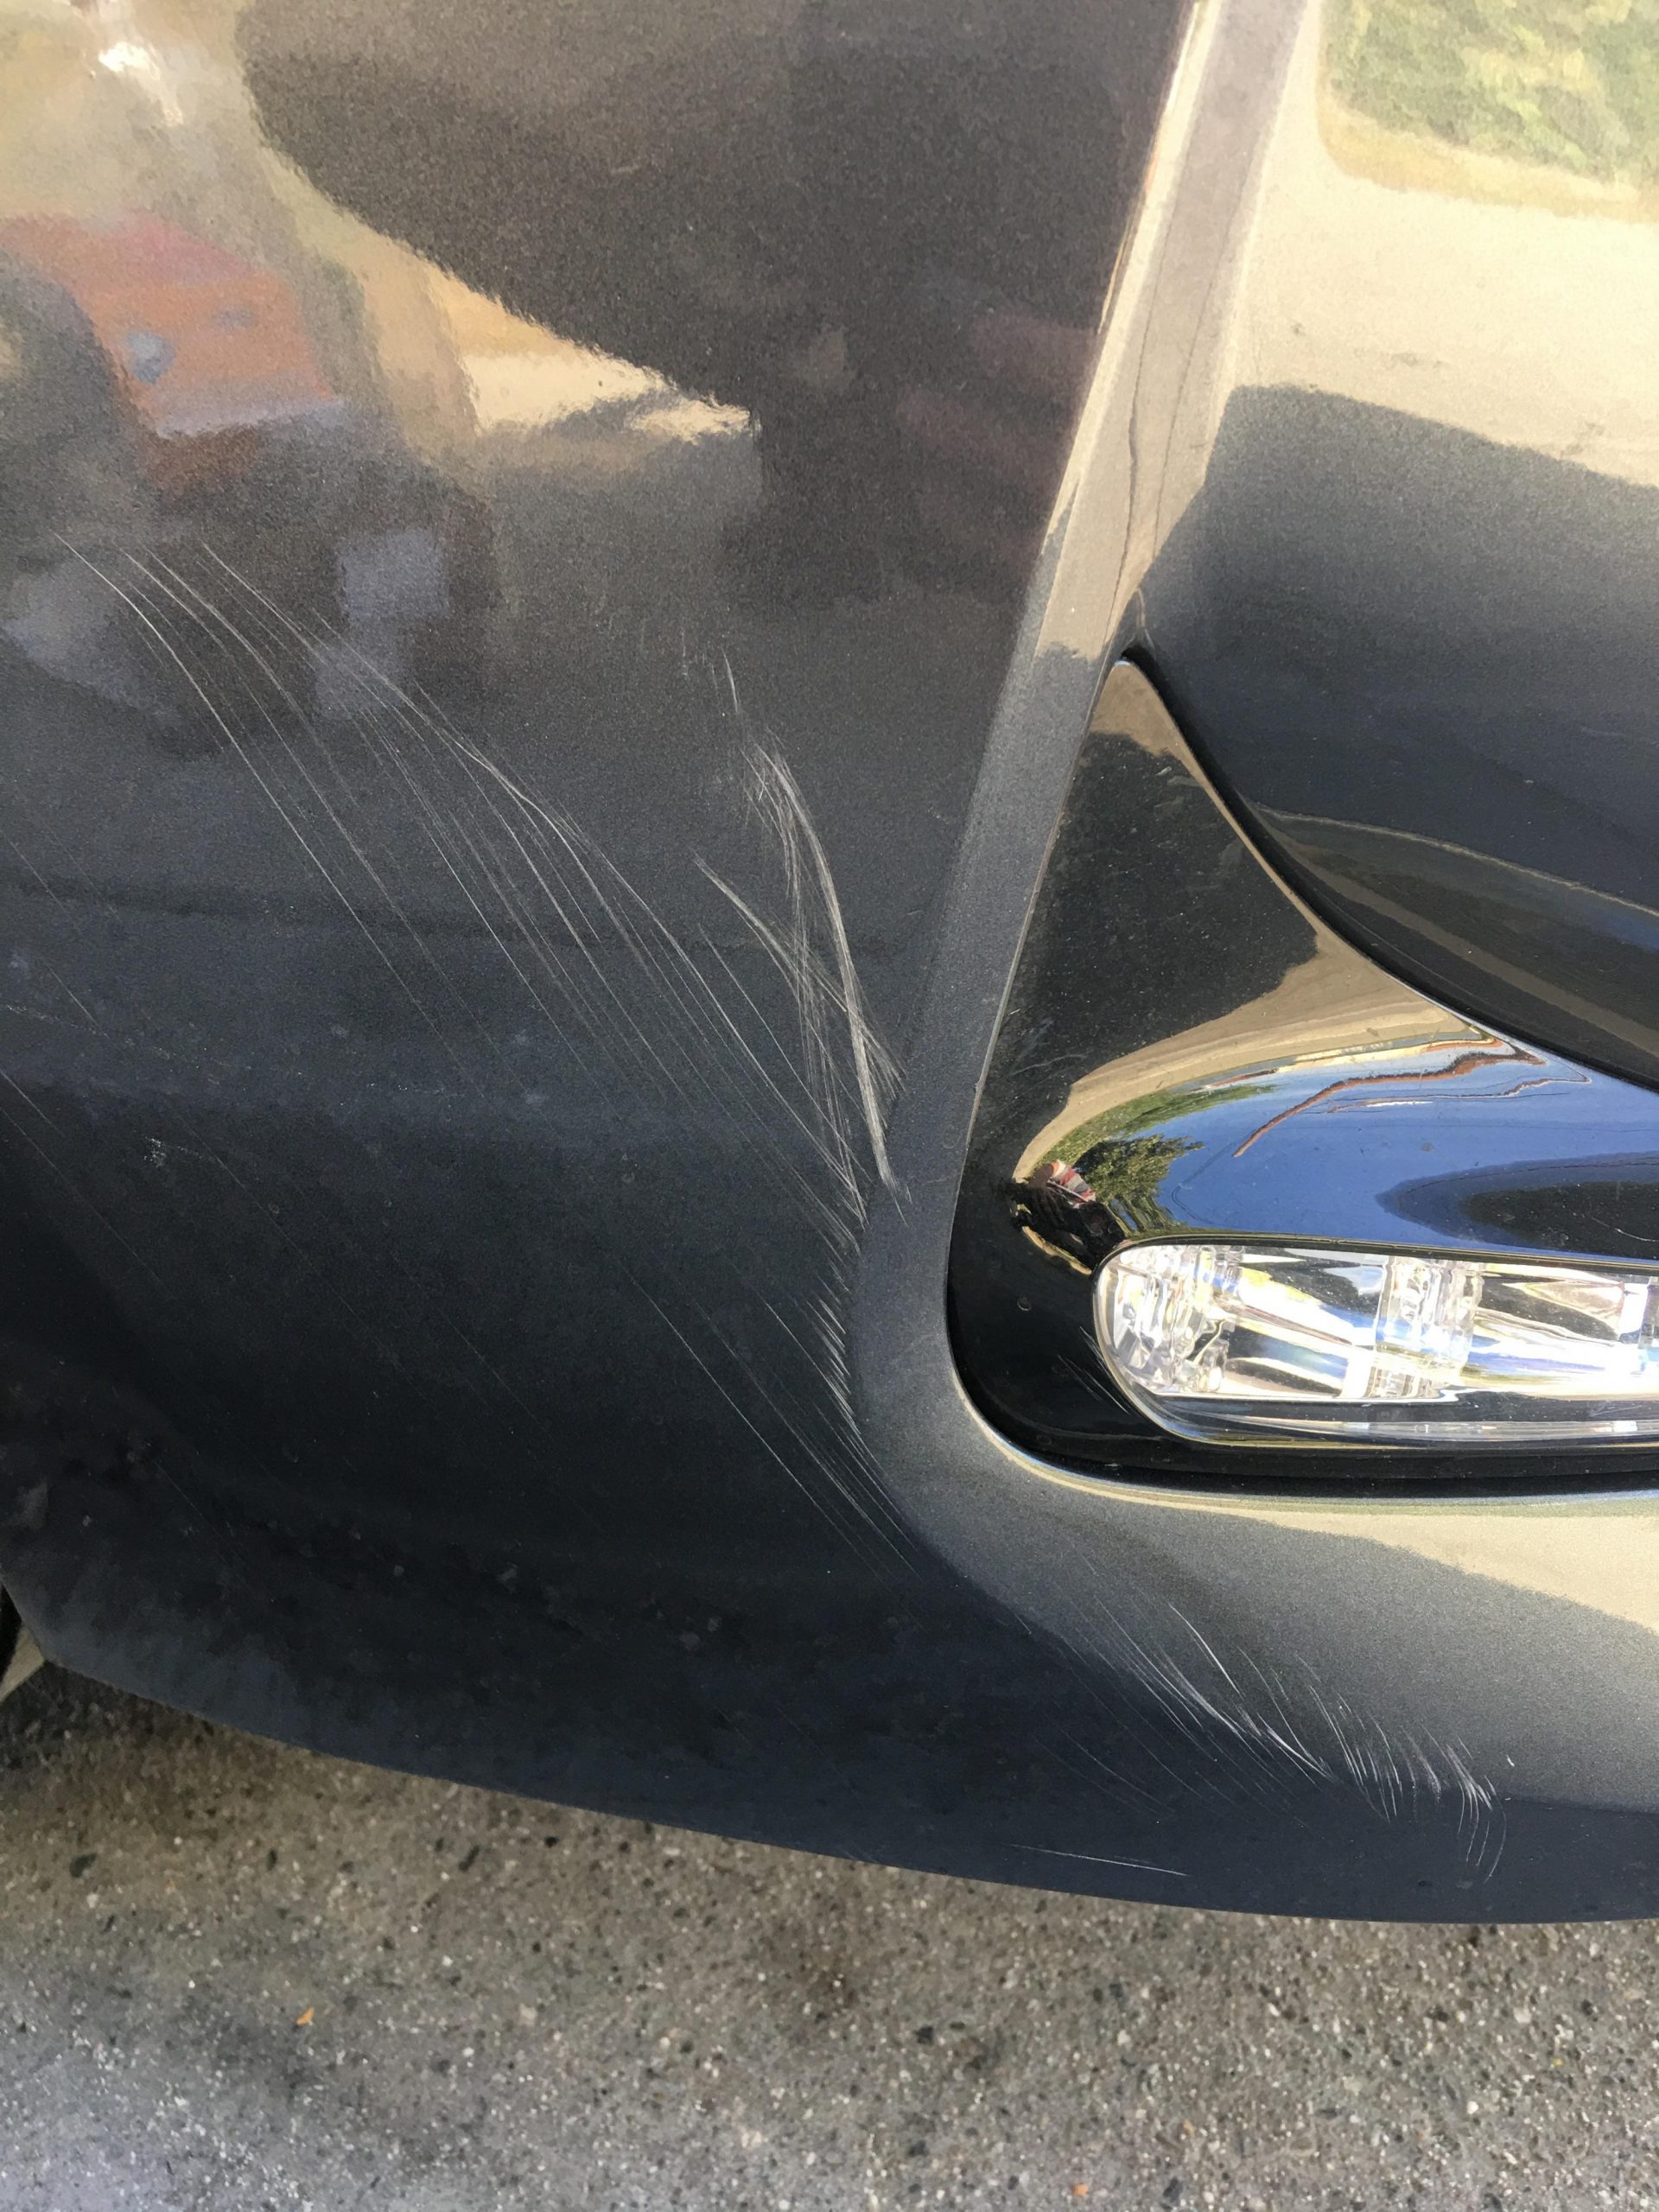 Anyone know how to get rid of scratches on a car? : howto